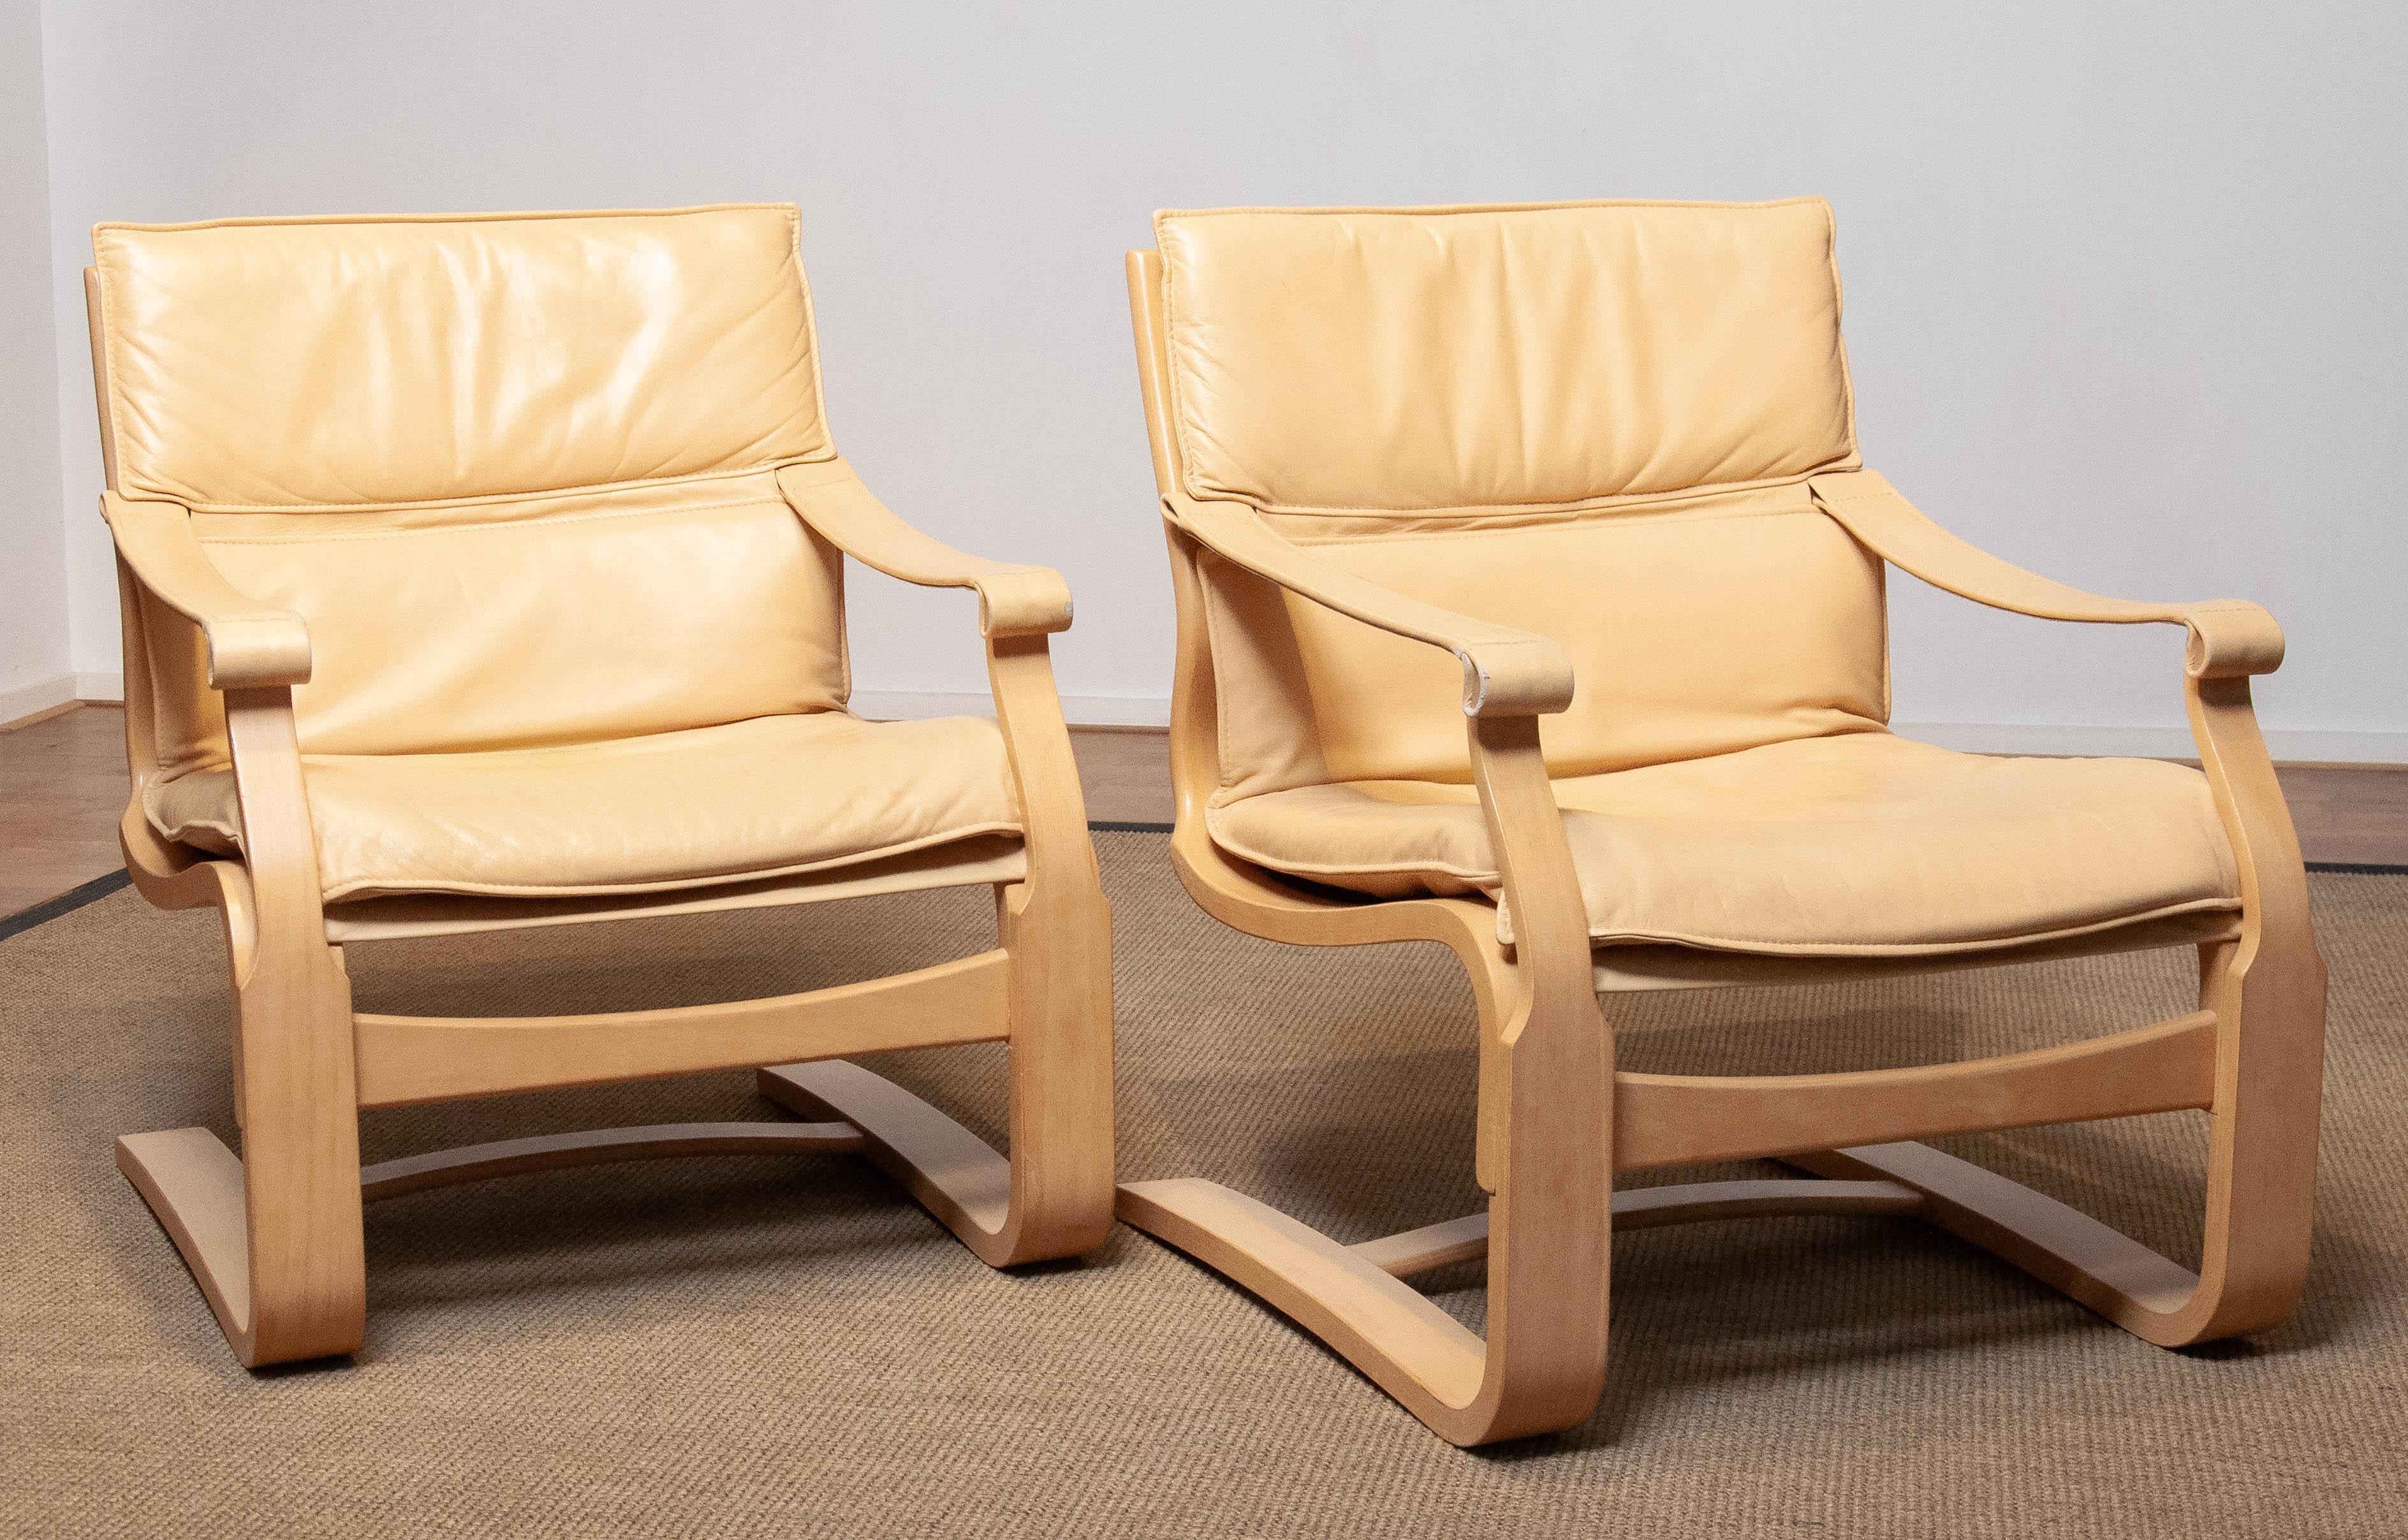 Pair Bentwood with Beige / Creme Leather Lounge Chairs by Ake Fribytter for Nelo For Sale 3